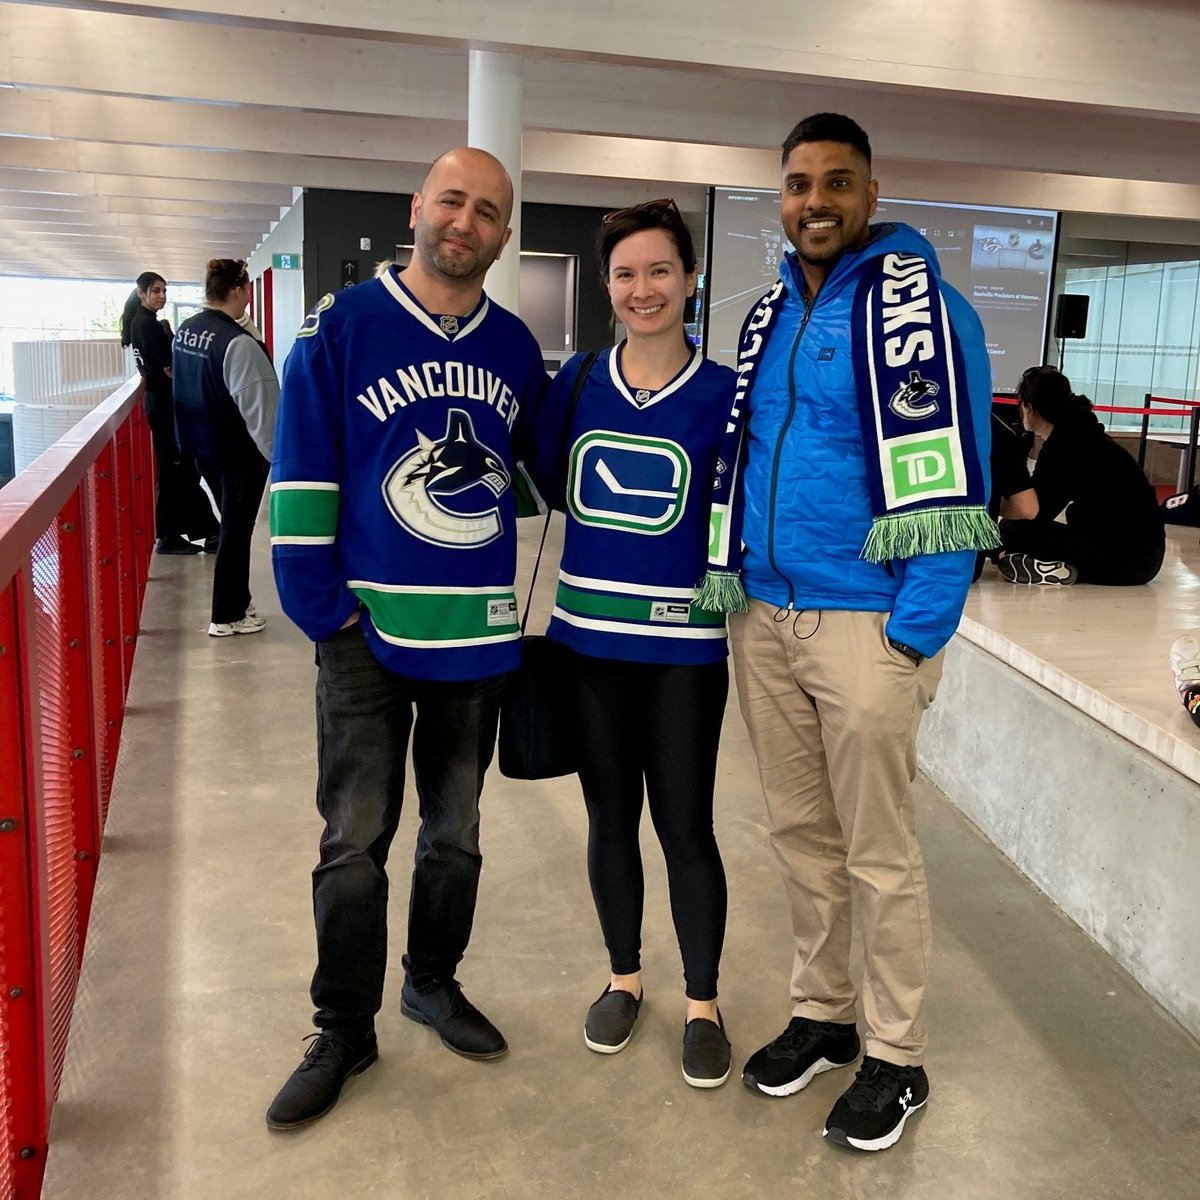 🏒Support the Vancouver @Canucks in style by donning your blue and green at the Rosemary Brown Recreation Centre! We're hosting a complimentary viewing party for Game 6 of the Stanley Cup Playoffs on Friday, May 3 at 4 pm, with festivities kicking off at 3:30 pm. 1/2